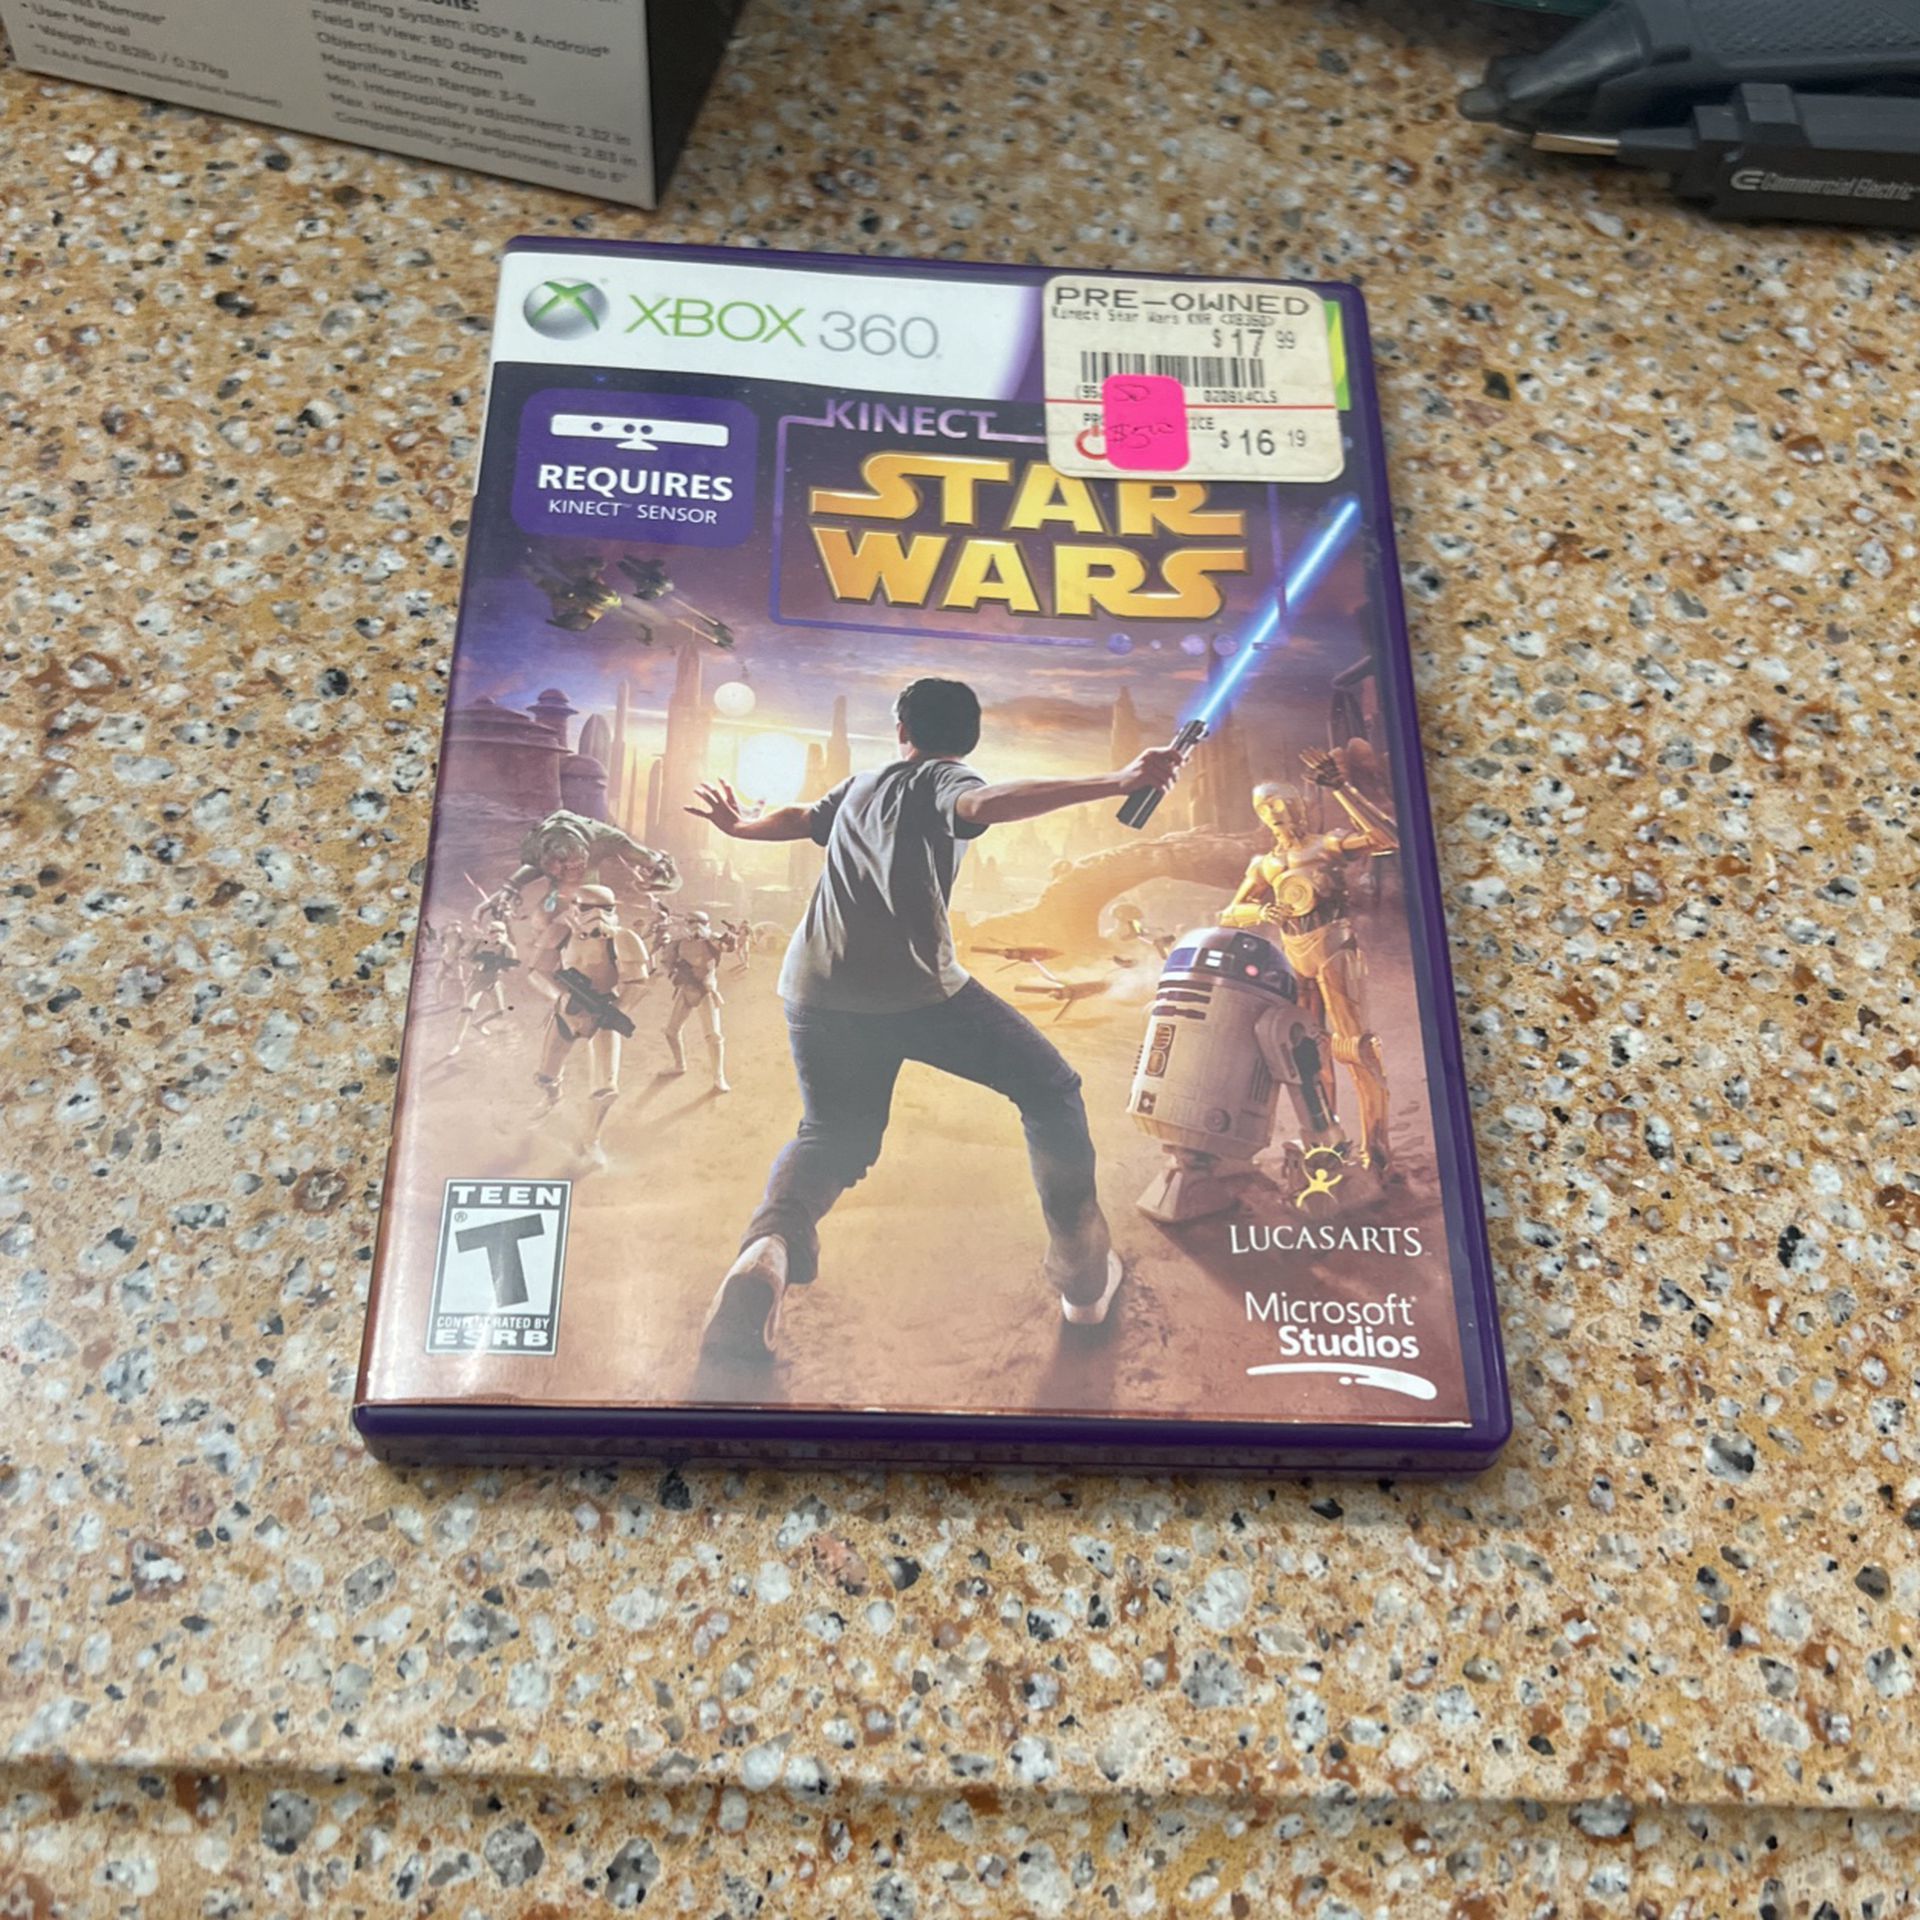 Star Wars Game For Kinect On Xbox 360